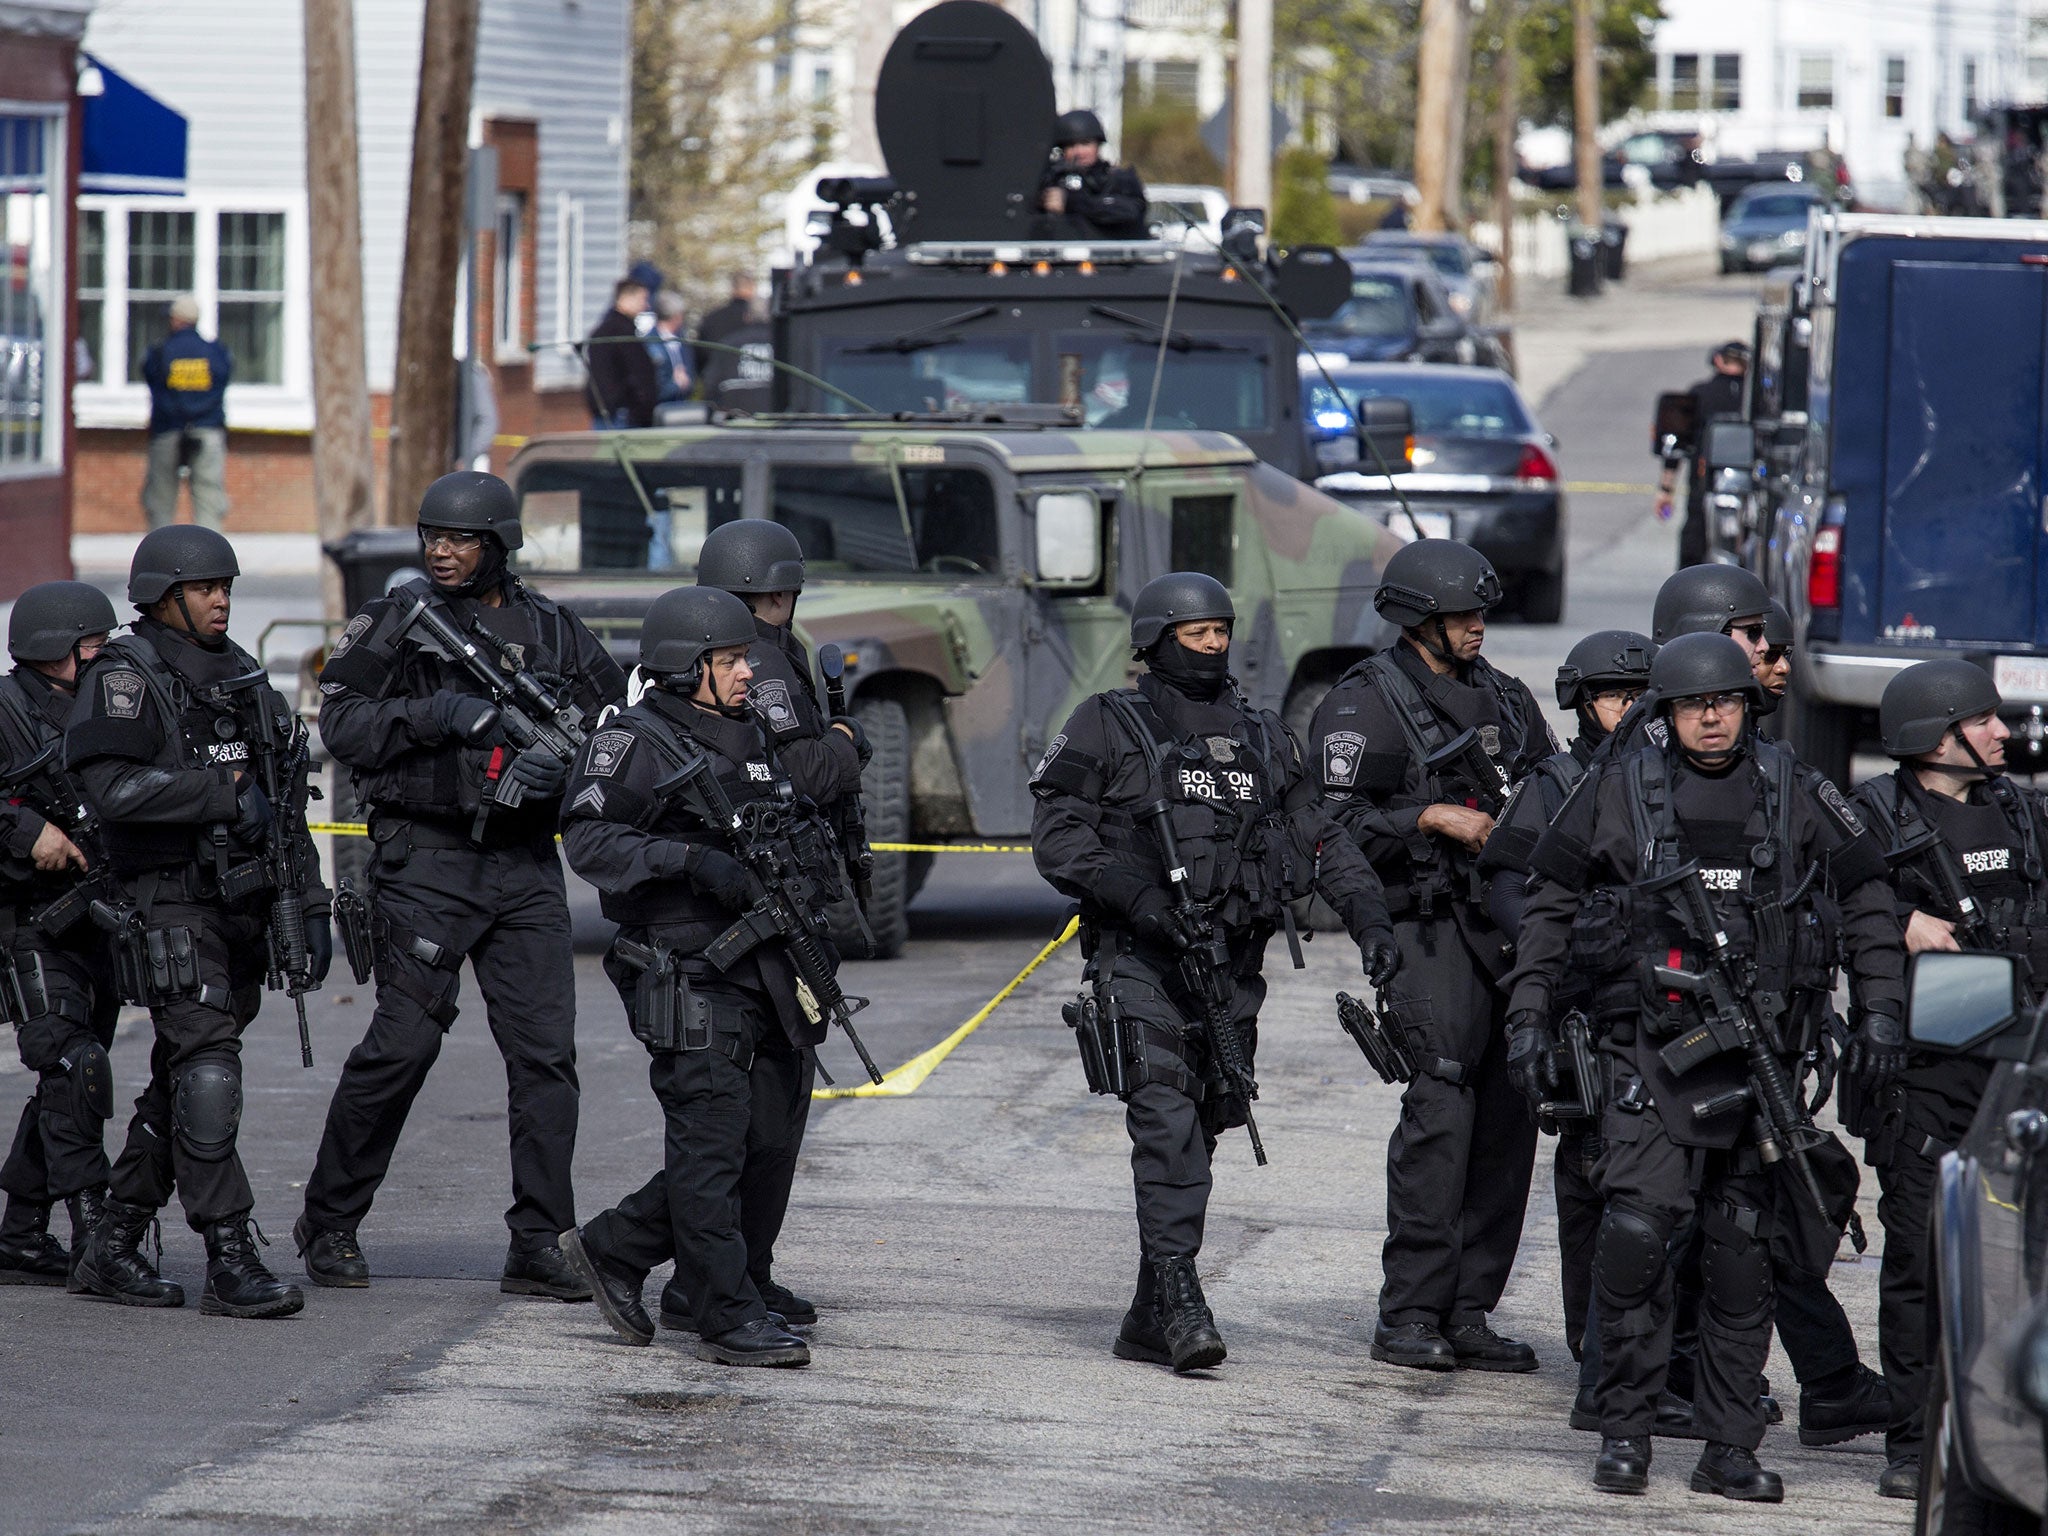 Heavily armed police continue to patrol the neighborhoods of Watertown as they continue a massive search for one of two suspects in the Boston Marathon bombing